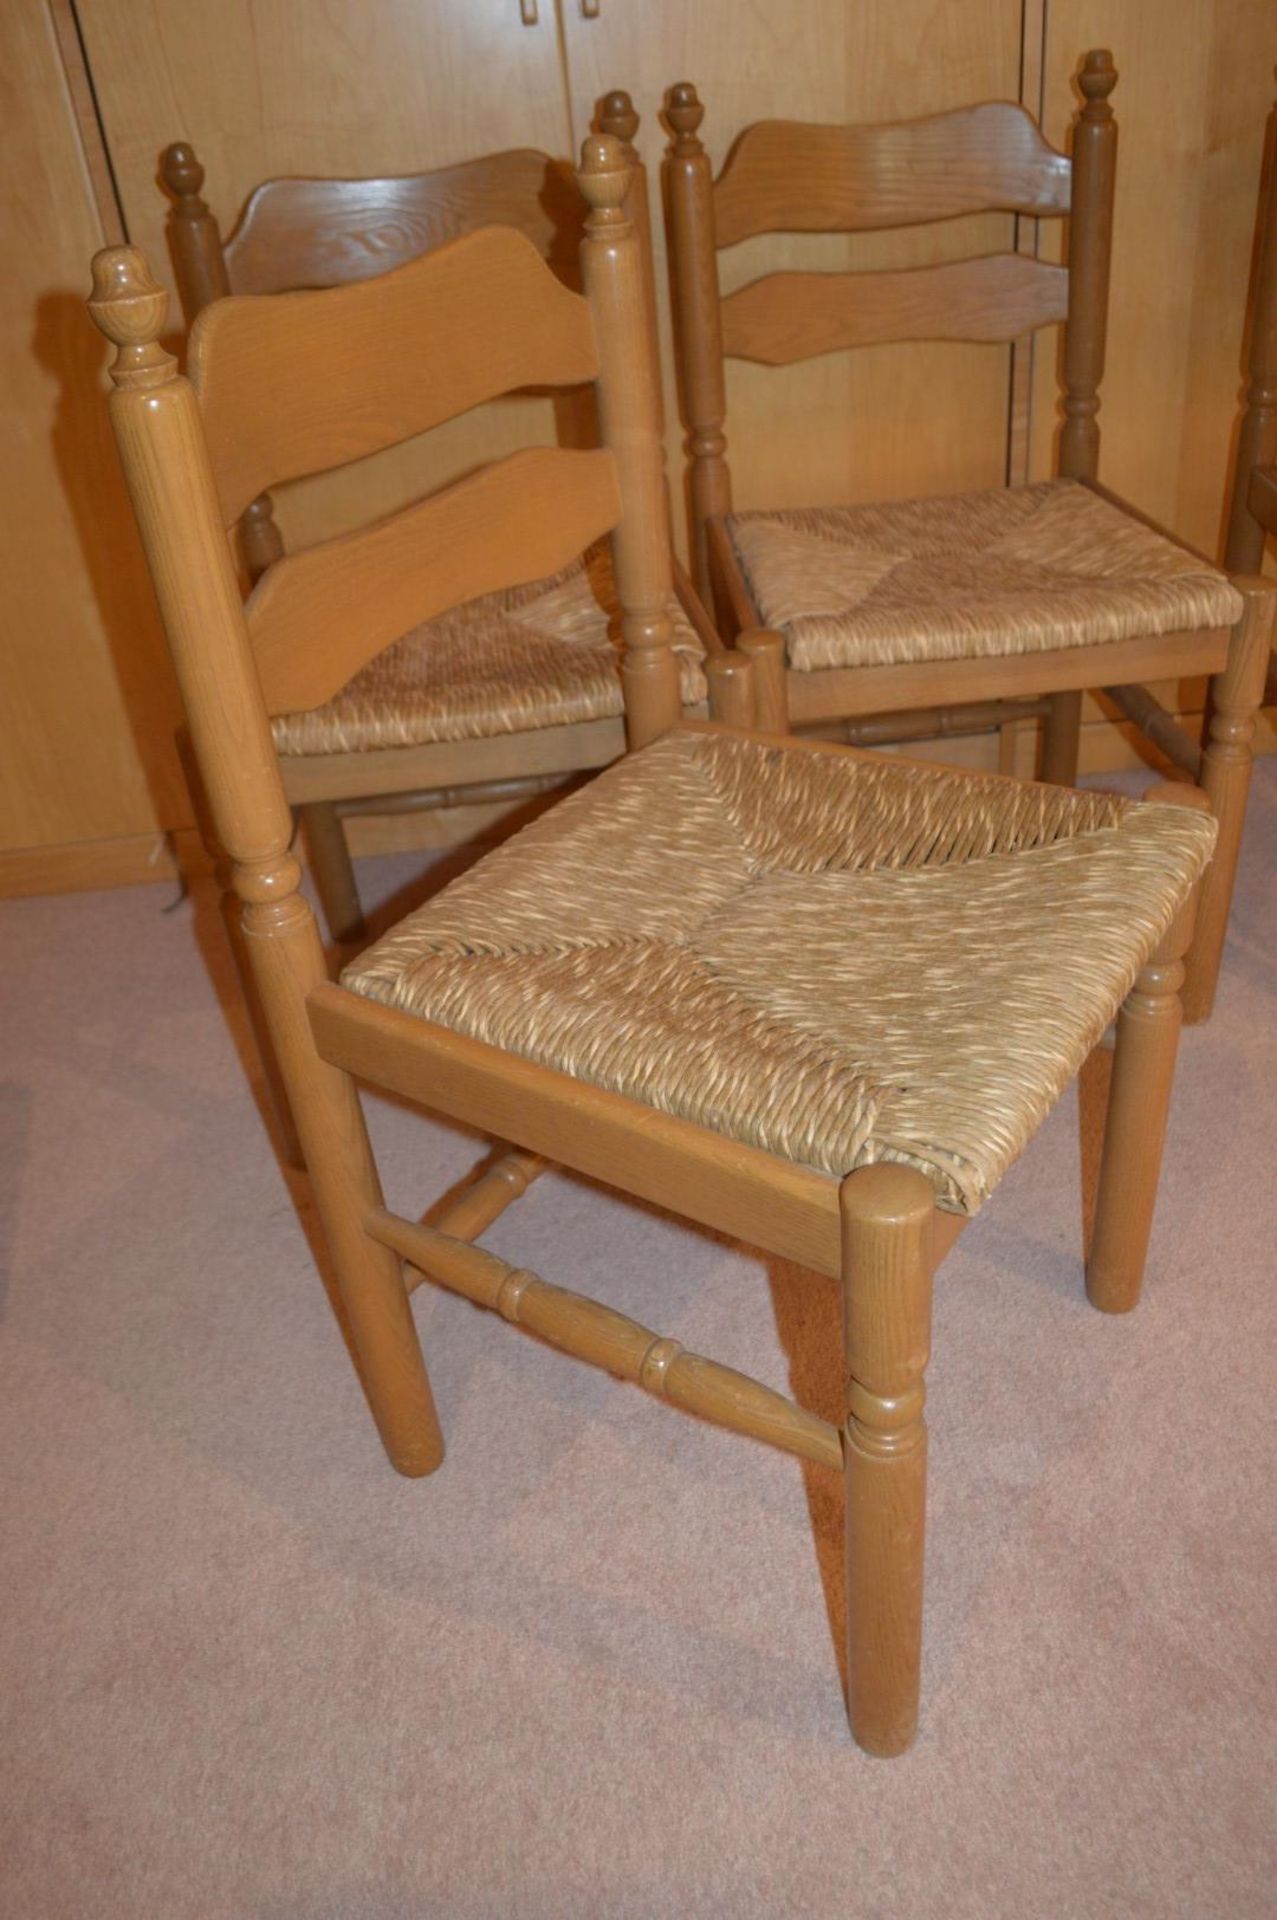 4 x Wooden Chairs With Thatched Seats - CL368 - Bowdon WA14 - NO VAT - Image 3 of 3